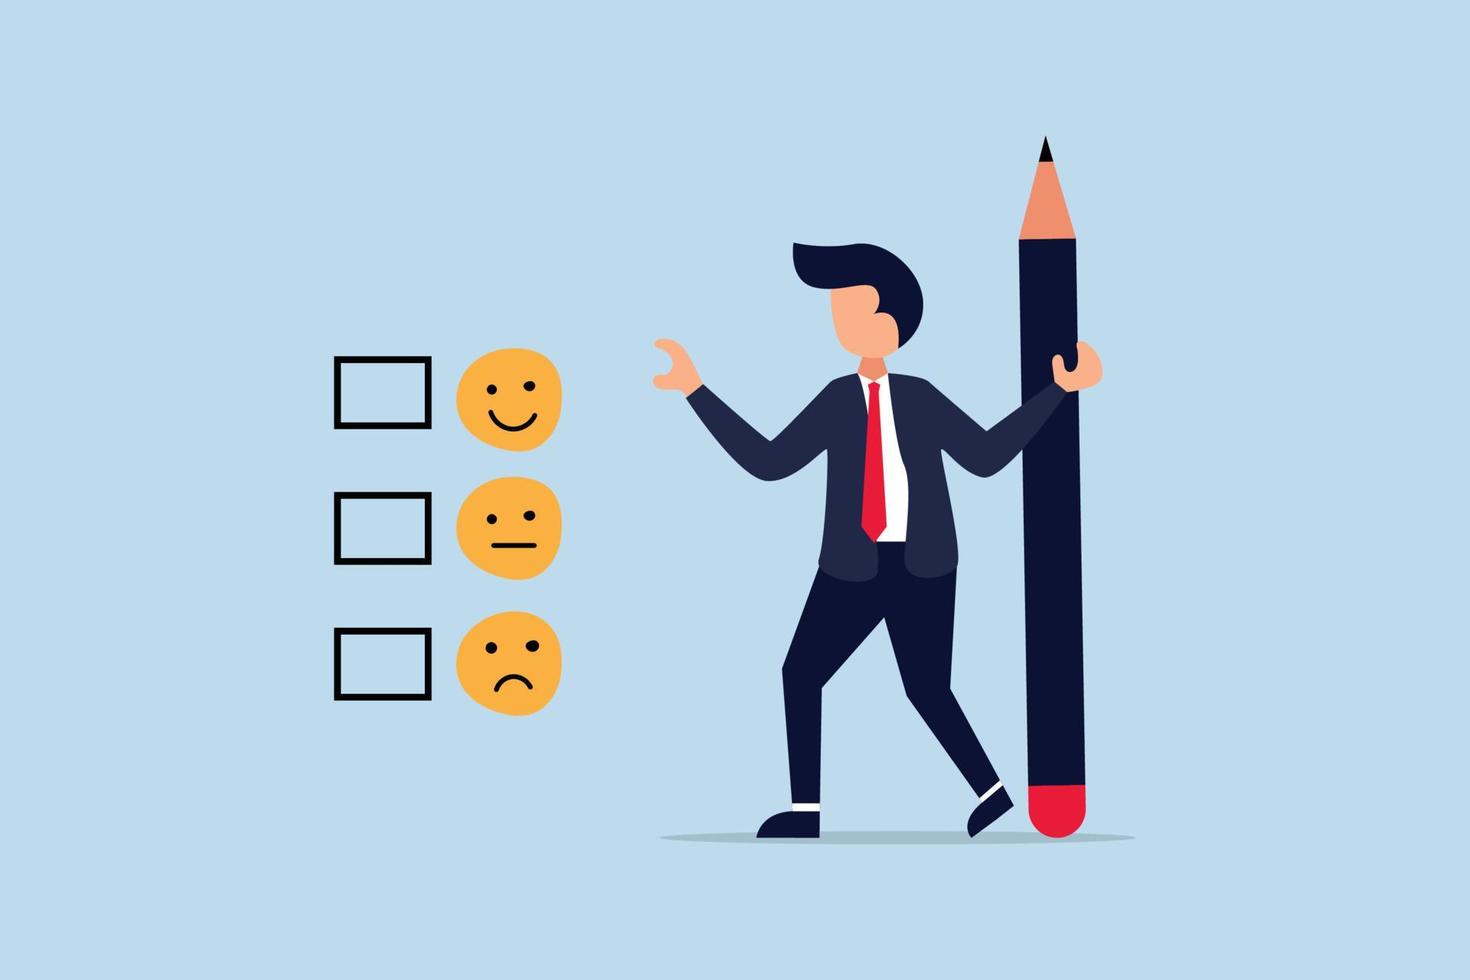 Customer rating, feedback from consumer for liking product and service concept, man holding pencil thinking about experience and giving rating on questionnaire with happy, neutral and angry faces. vector